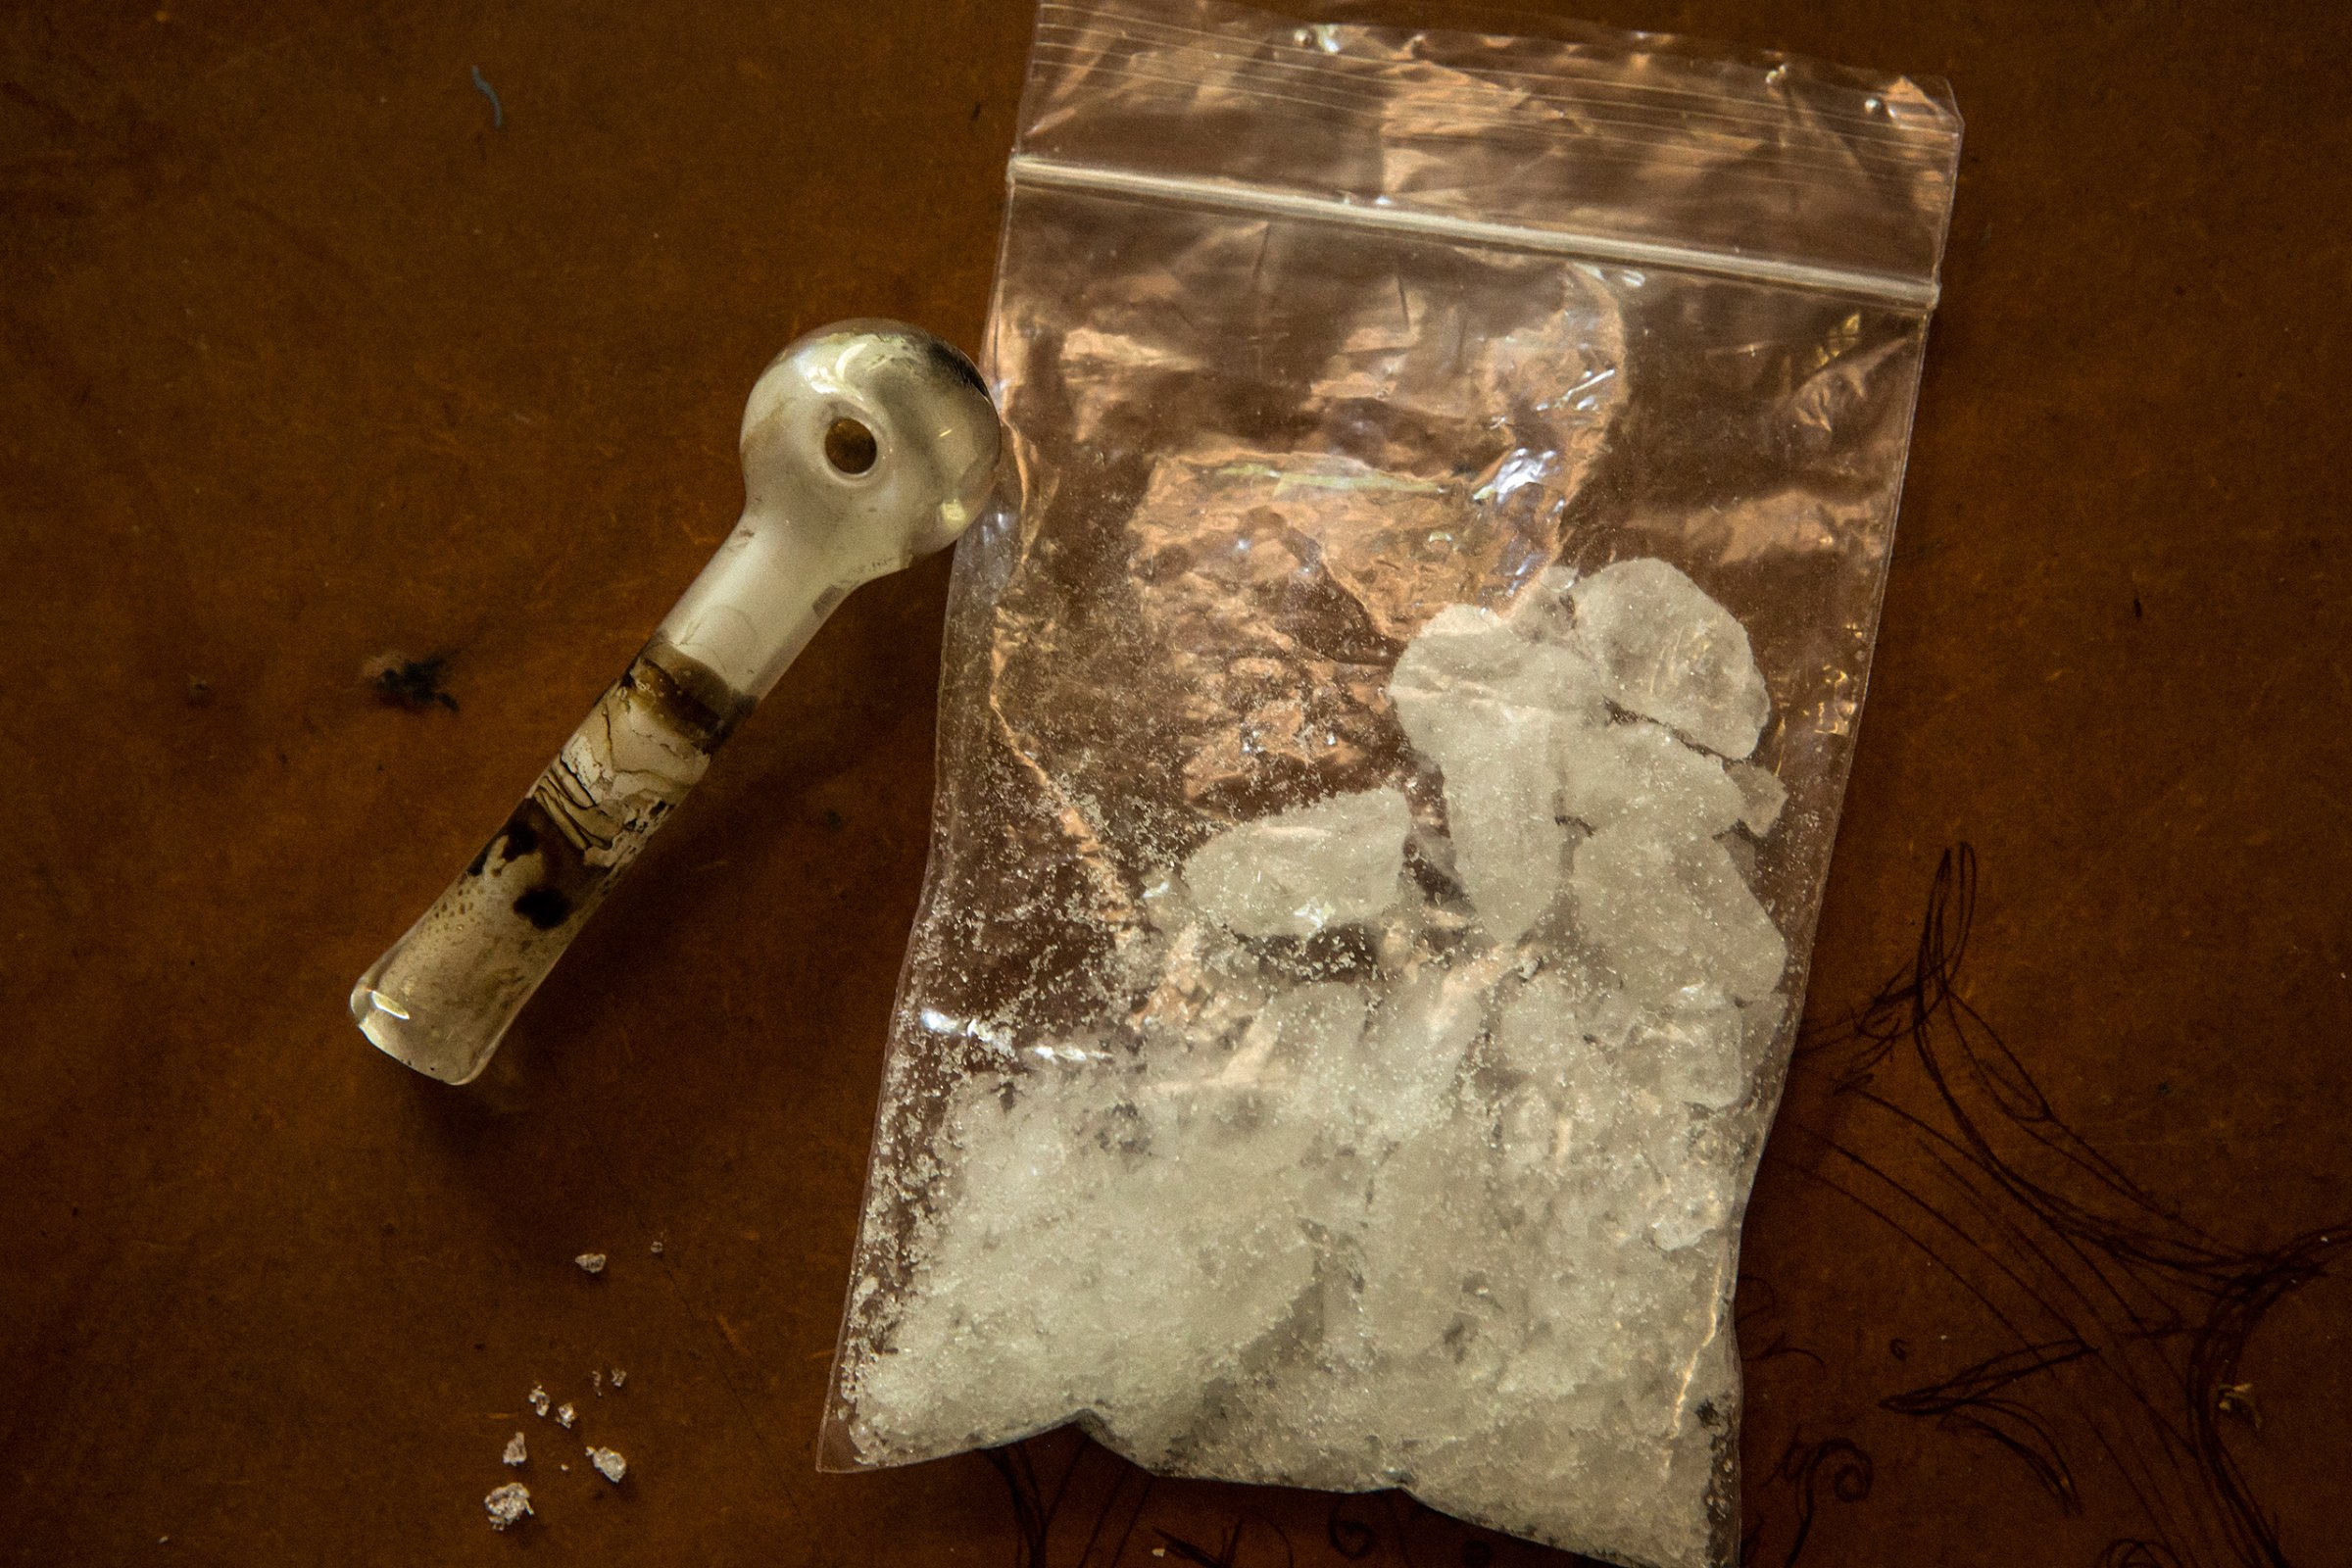 A bag of ice, about four-fifths of an ounce, next to a glass pipe in Rockhampton.